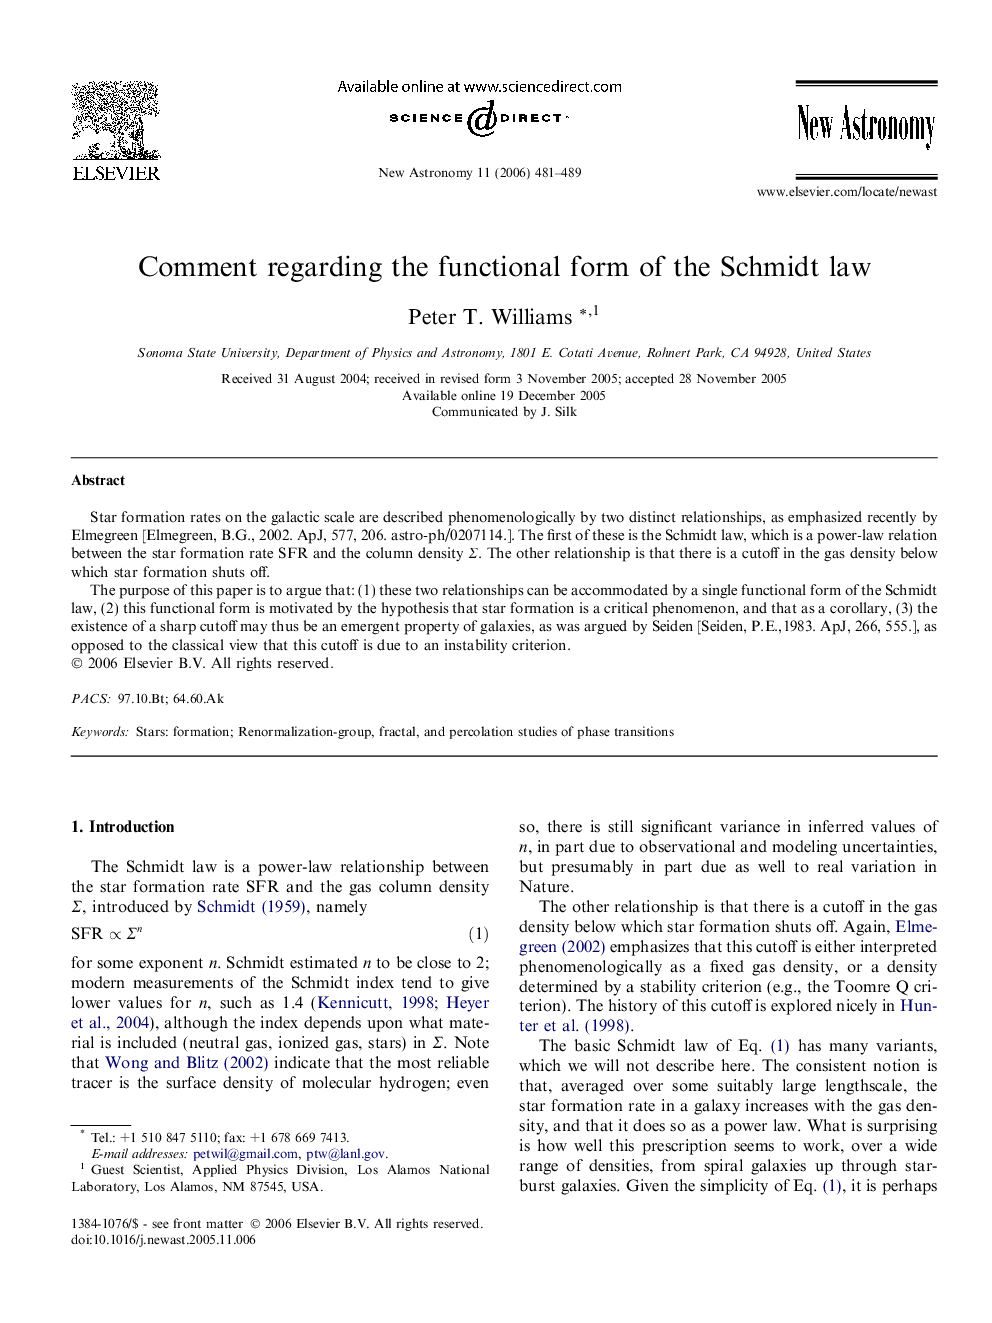 Comment regarding the functional form of the Schmidt law